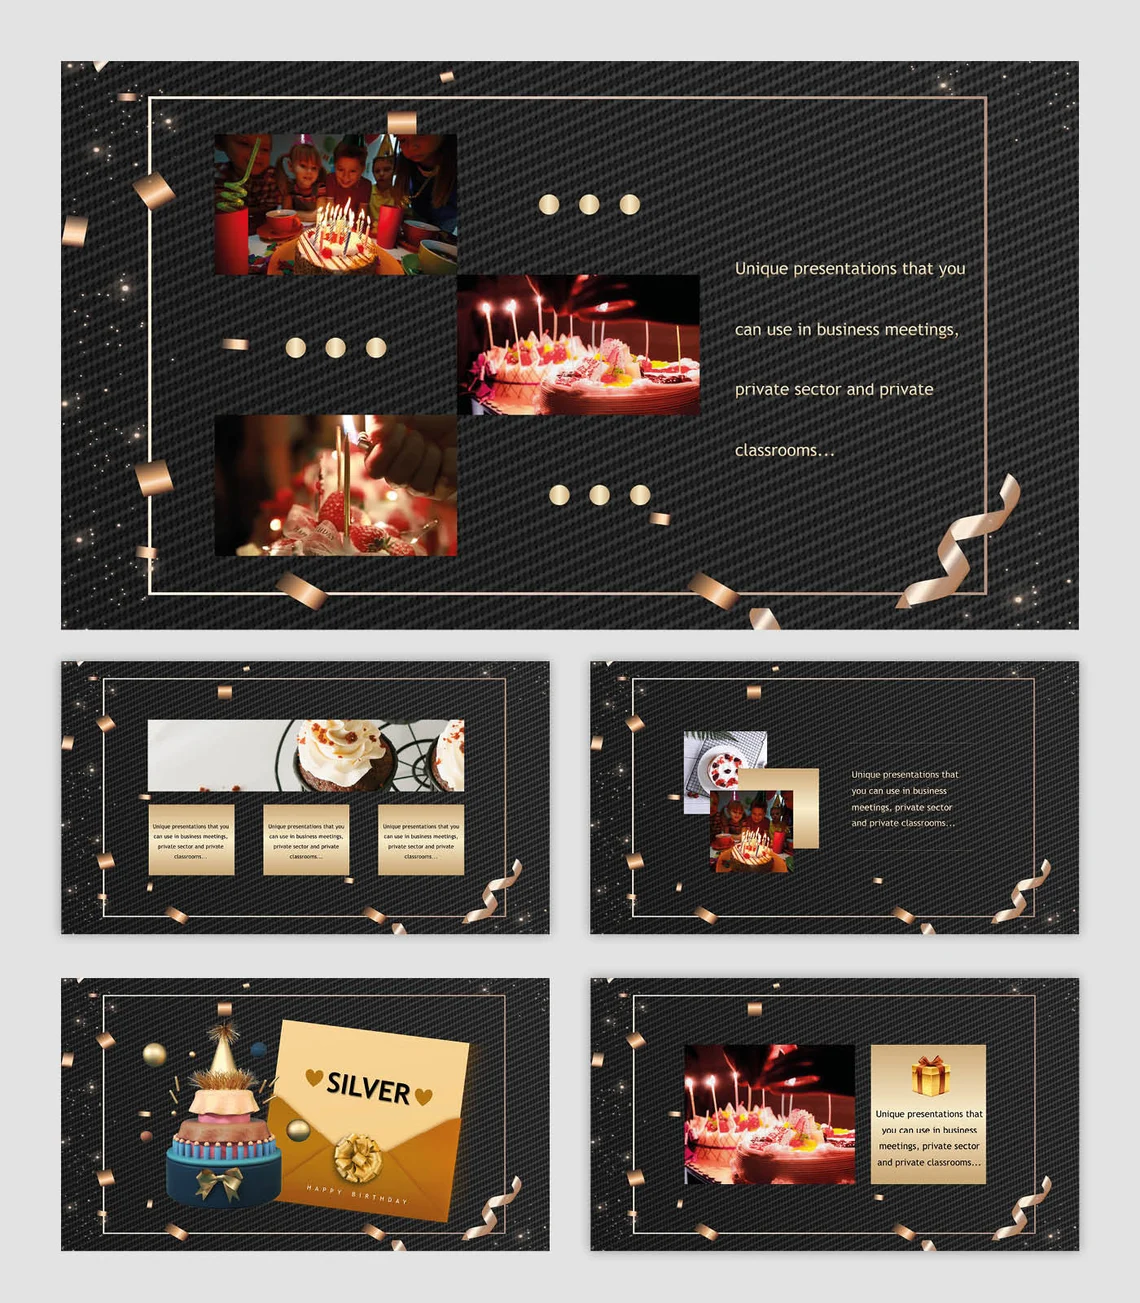 A set of 5 different birthday party events powerpoint templates in black, beige and white on a gray background.